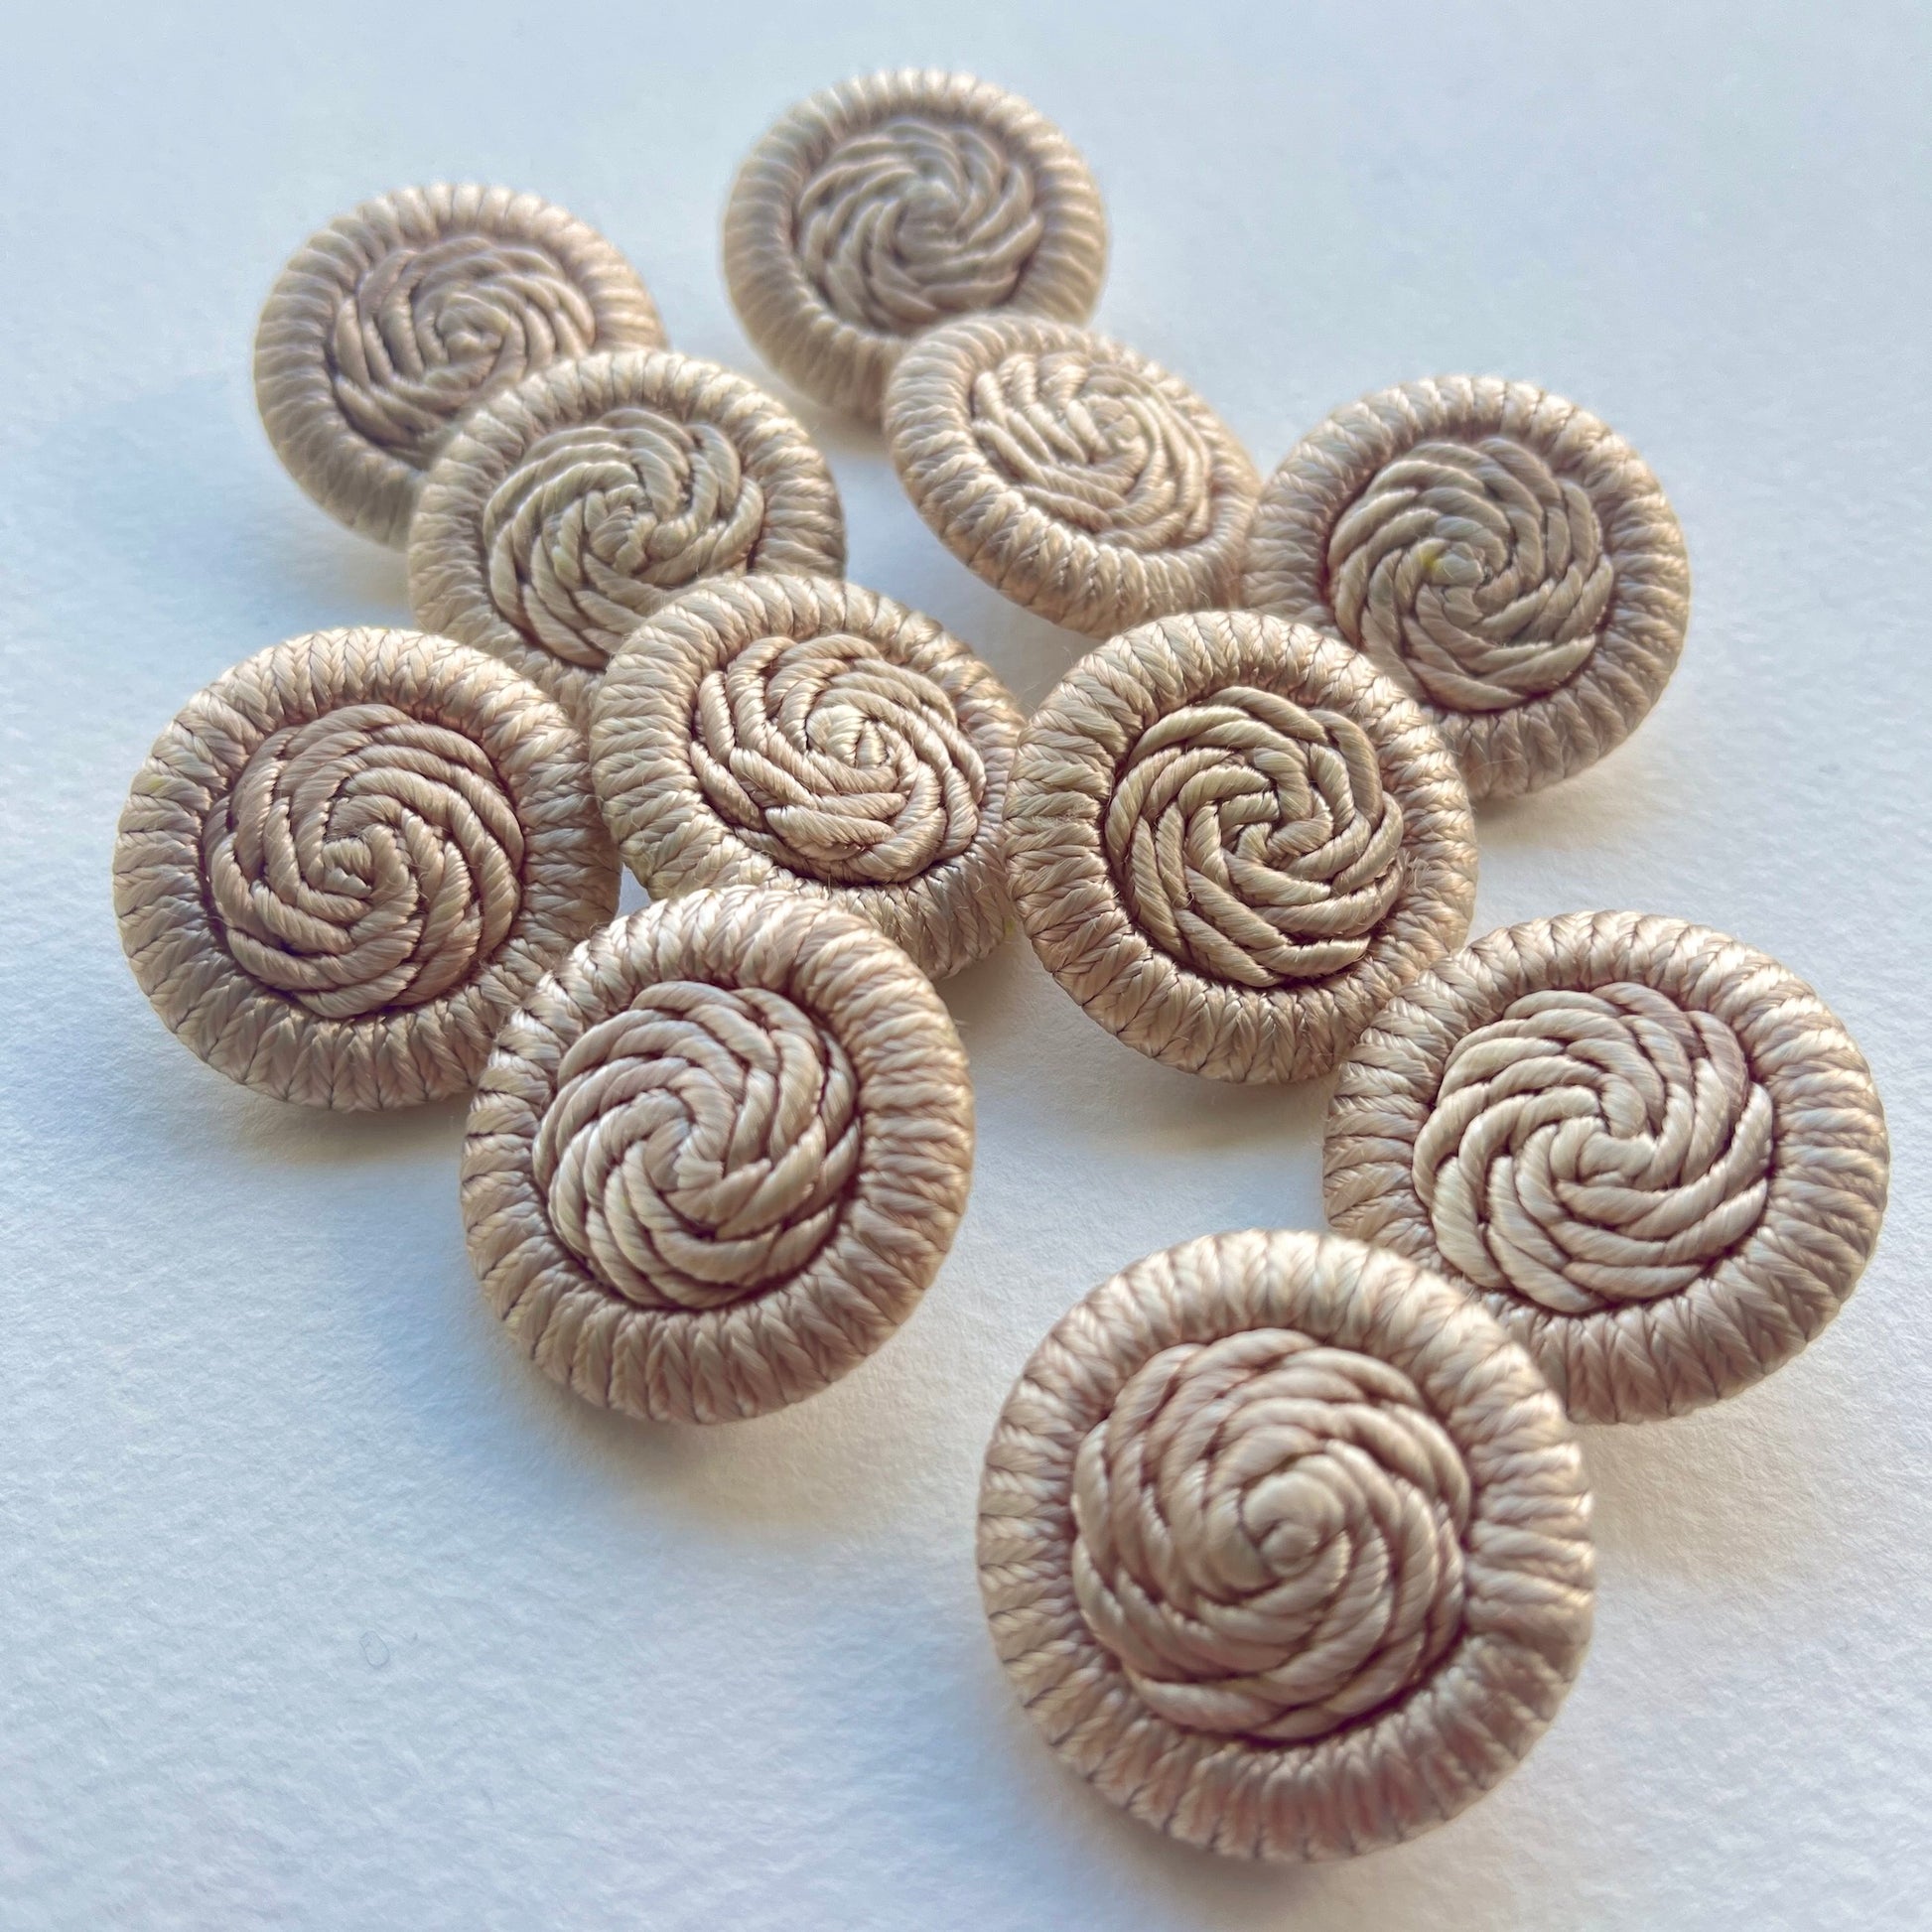 statement coat button, 2.9cm button, 1.25" button. Beigejacket button, silk corded button with knitted centres  in large sizes. soutache cord button, passementarie buttons, Vintage button.